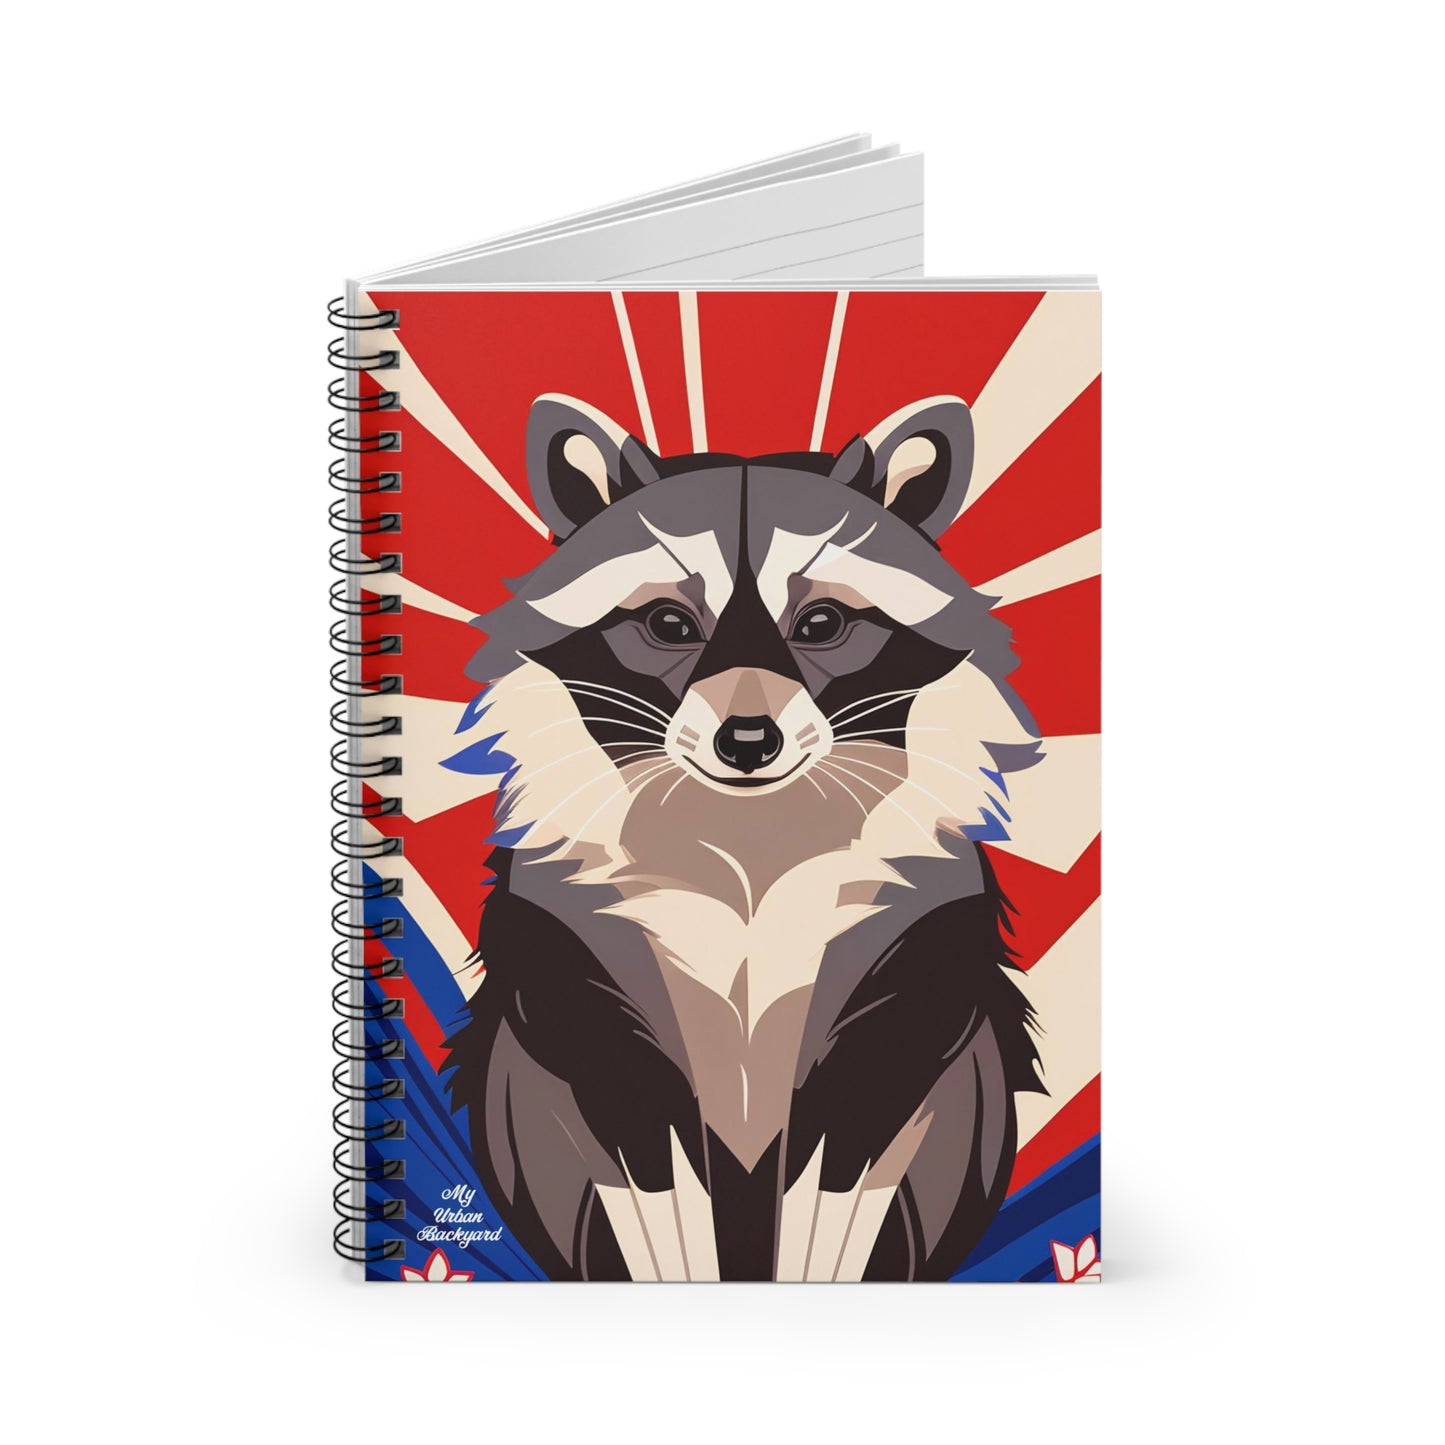 Raccoon on Art Deco Rays, Spiral Notebook Journal - Write in Style